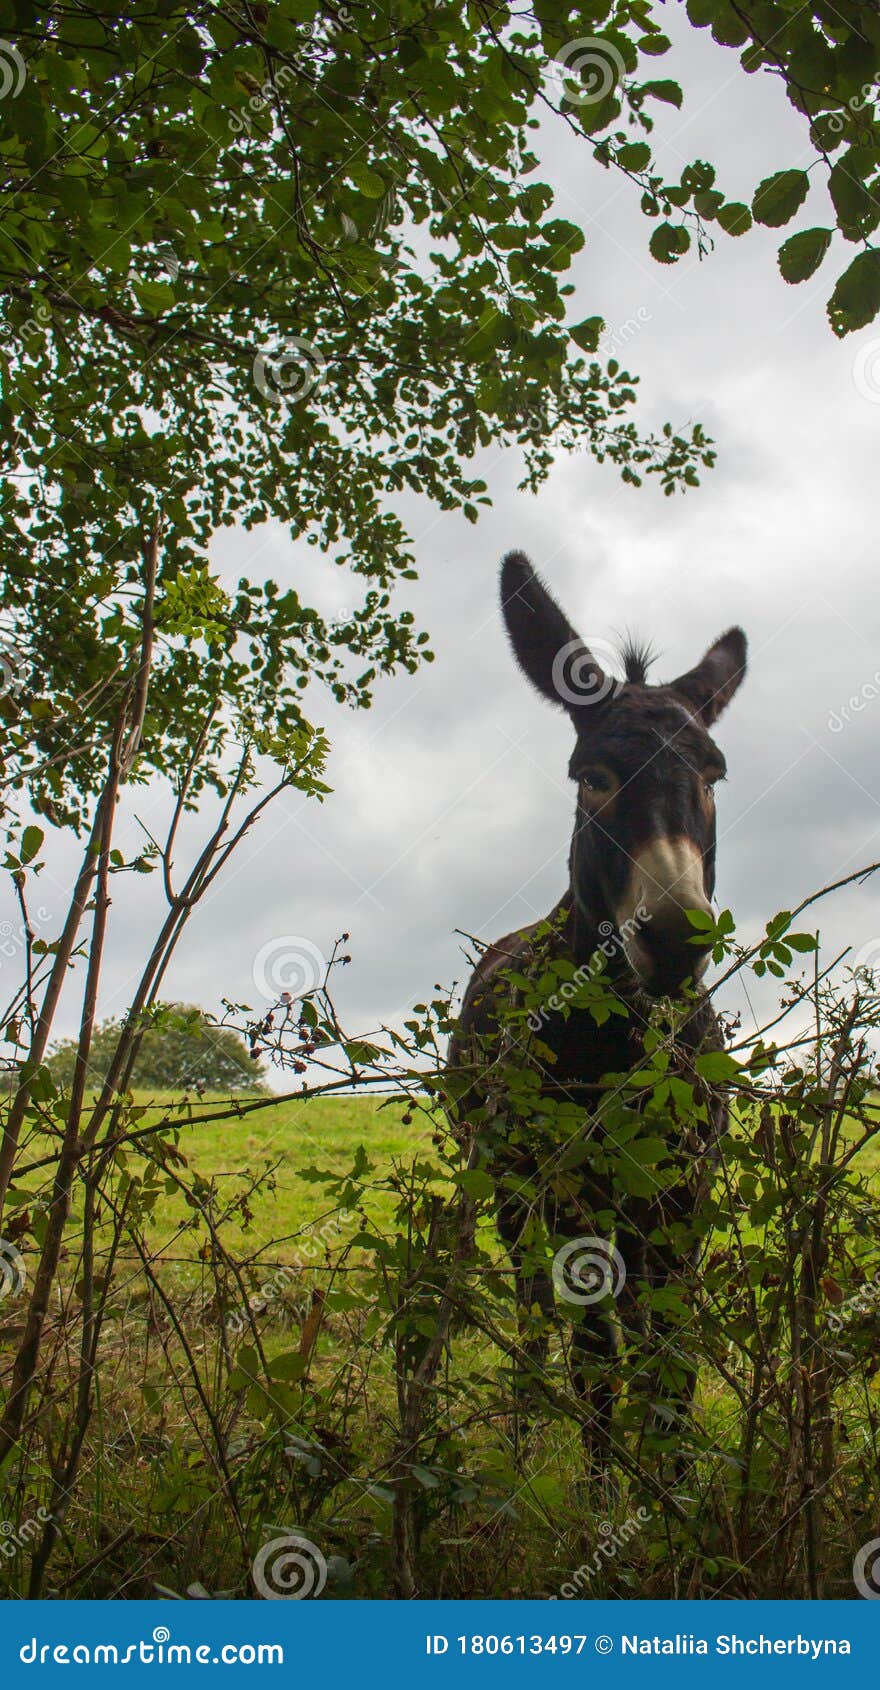 donkey in green field on cloudy day. lonely donkey at countyside. farm concept. animals concept. pasture background.